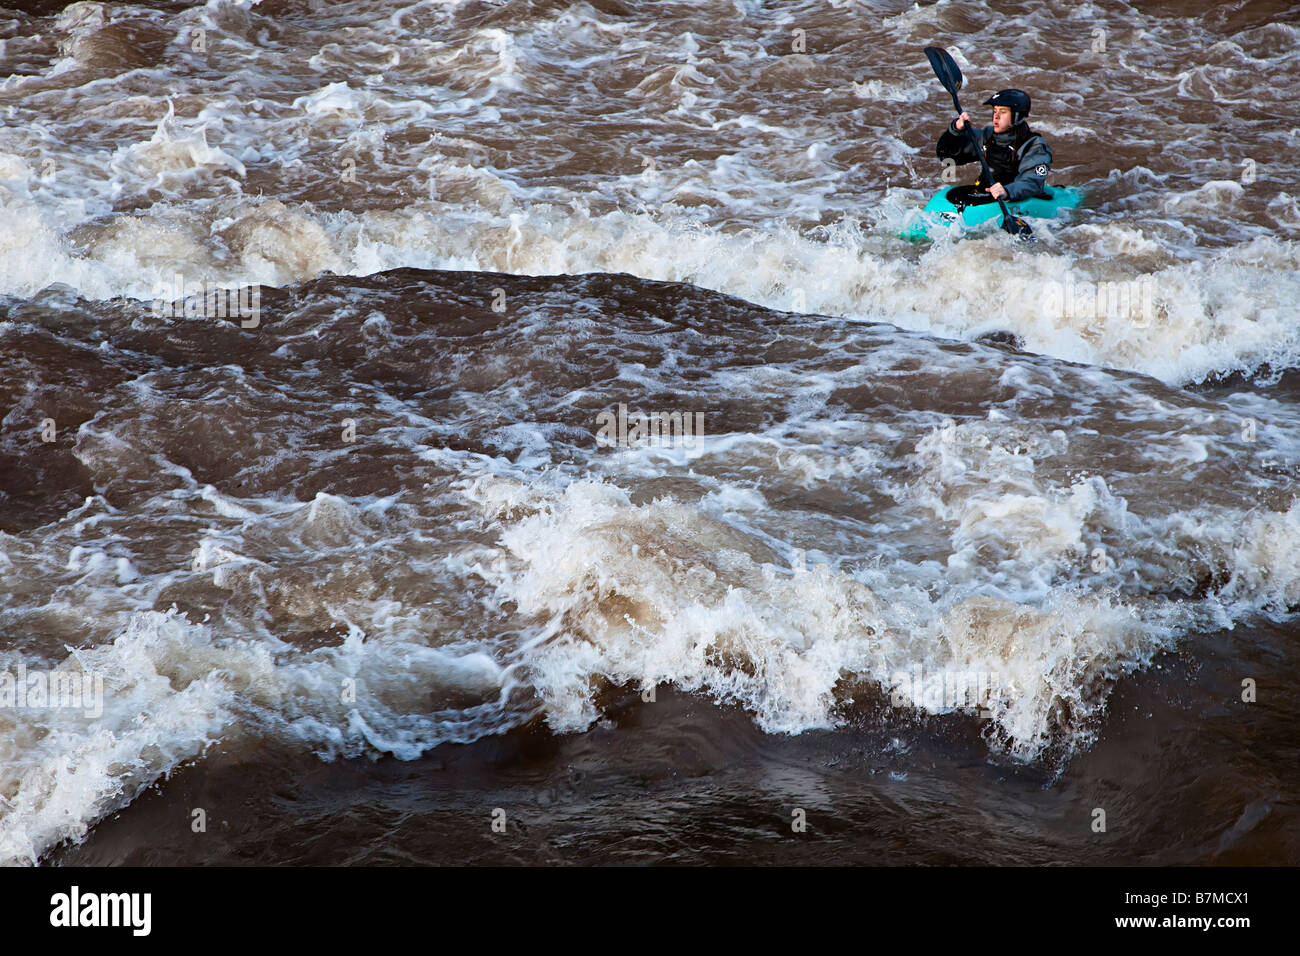 Person in kayak in white water River Usk Llangynidr Wales UK Stock Photo